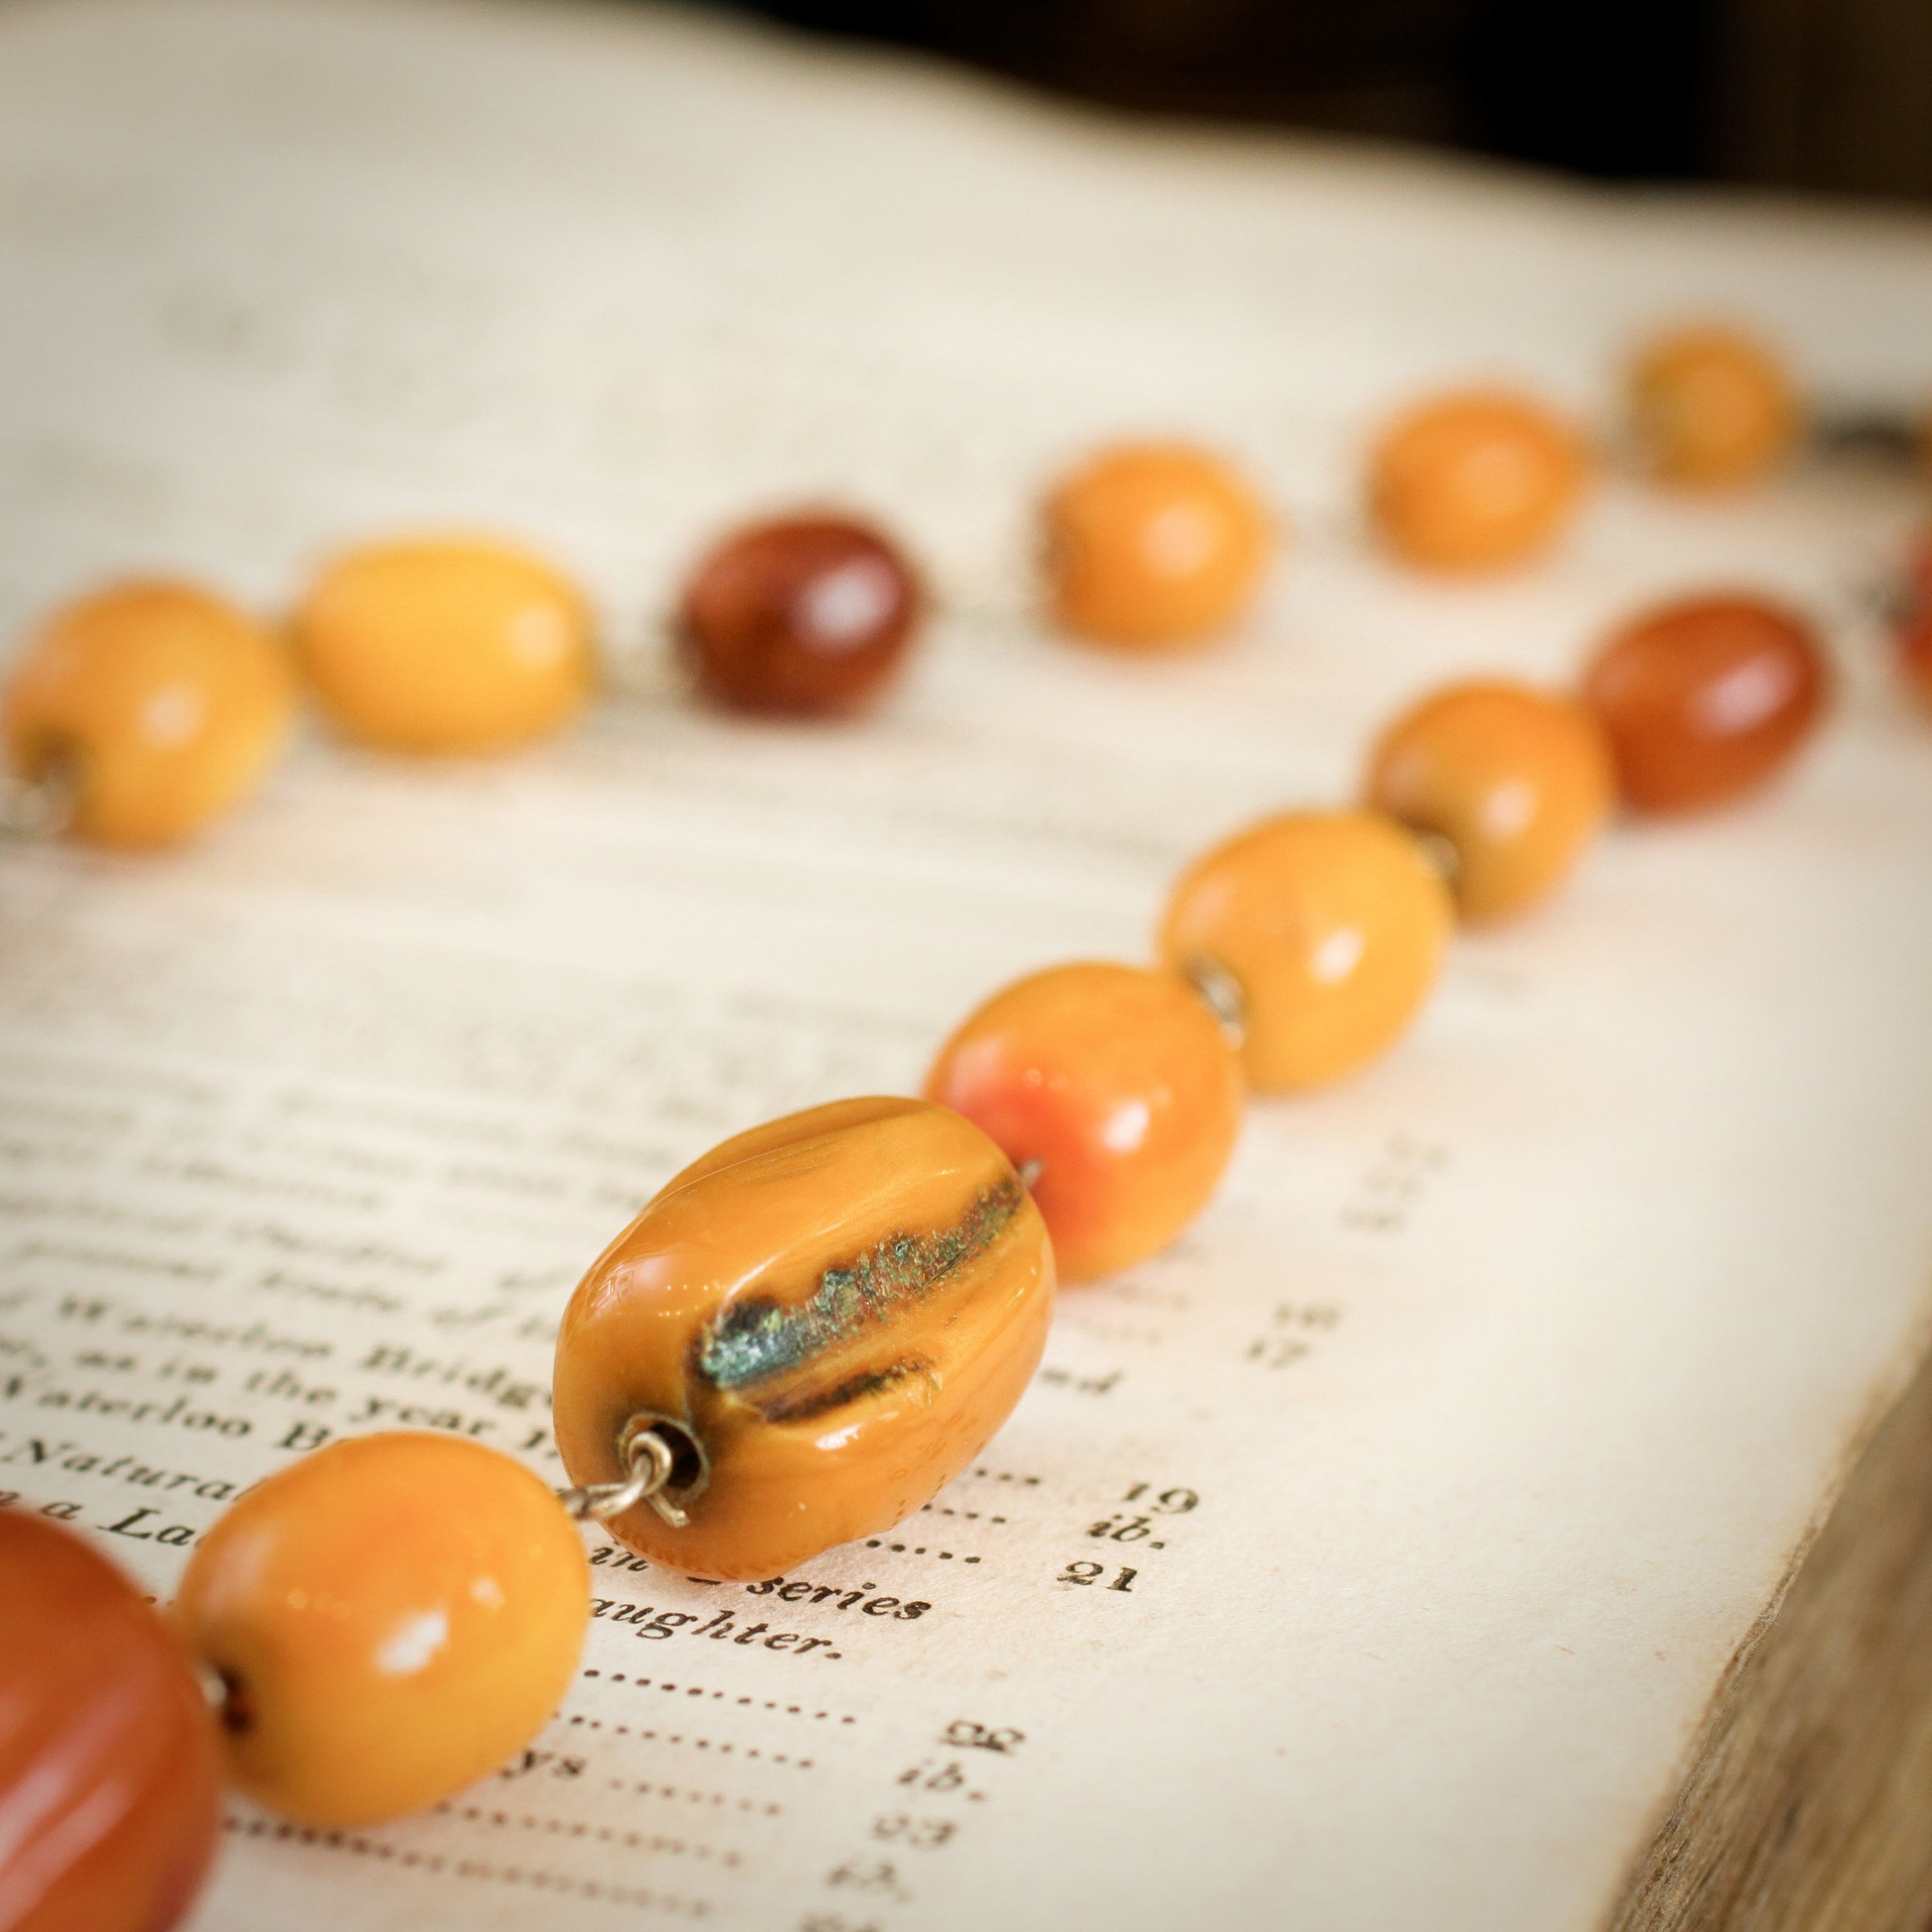 Fine & Genuine Antique Butterscotch Amber Bead Necklace - Beautiful Old  Beads | eBay